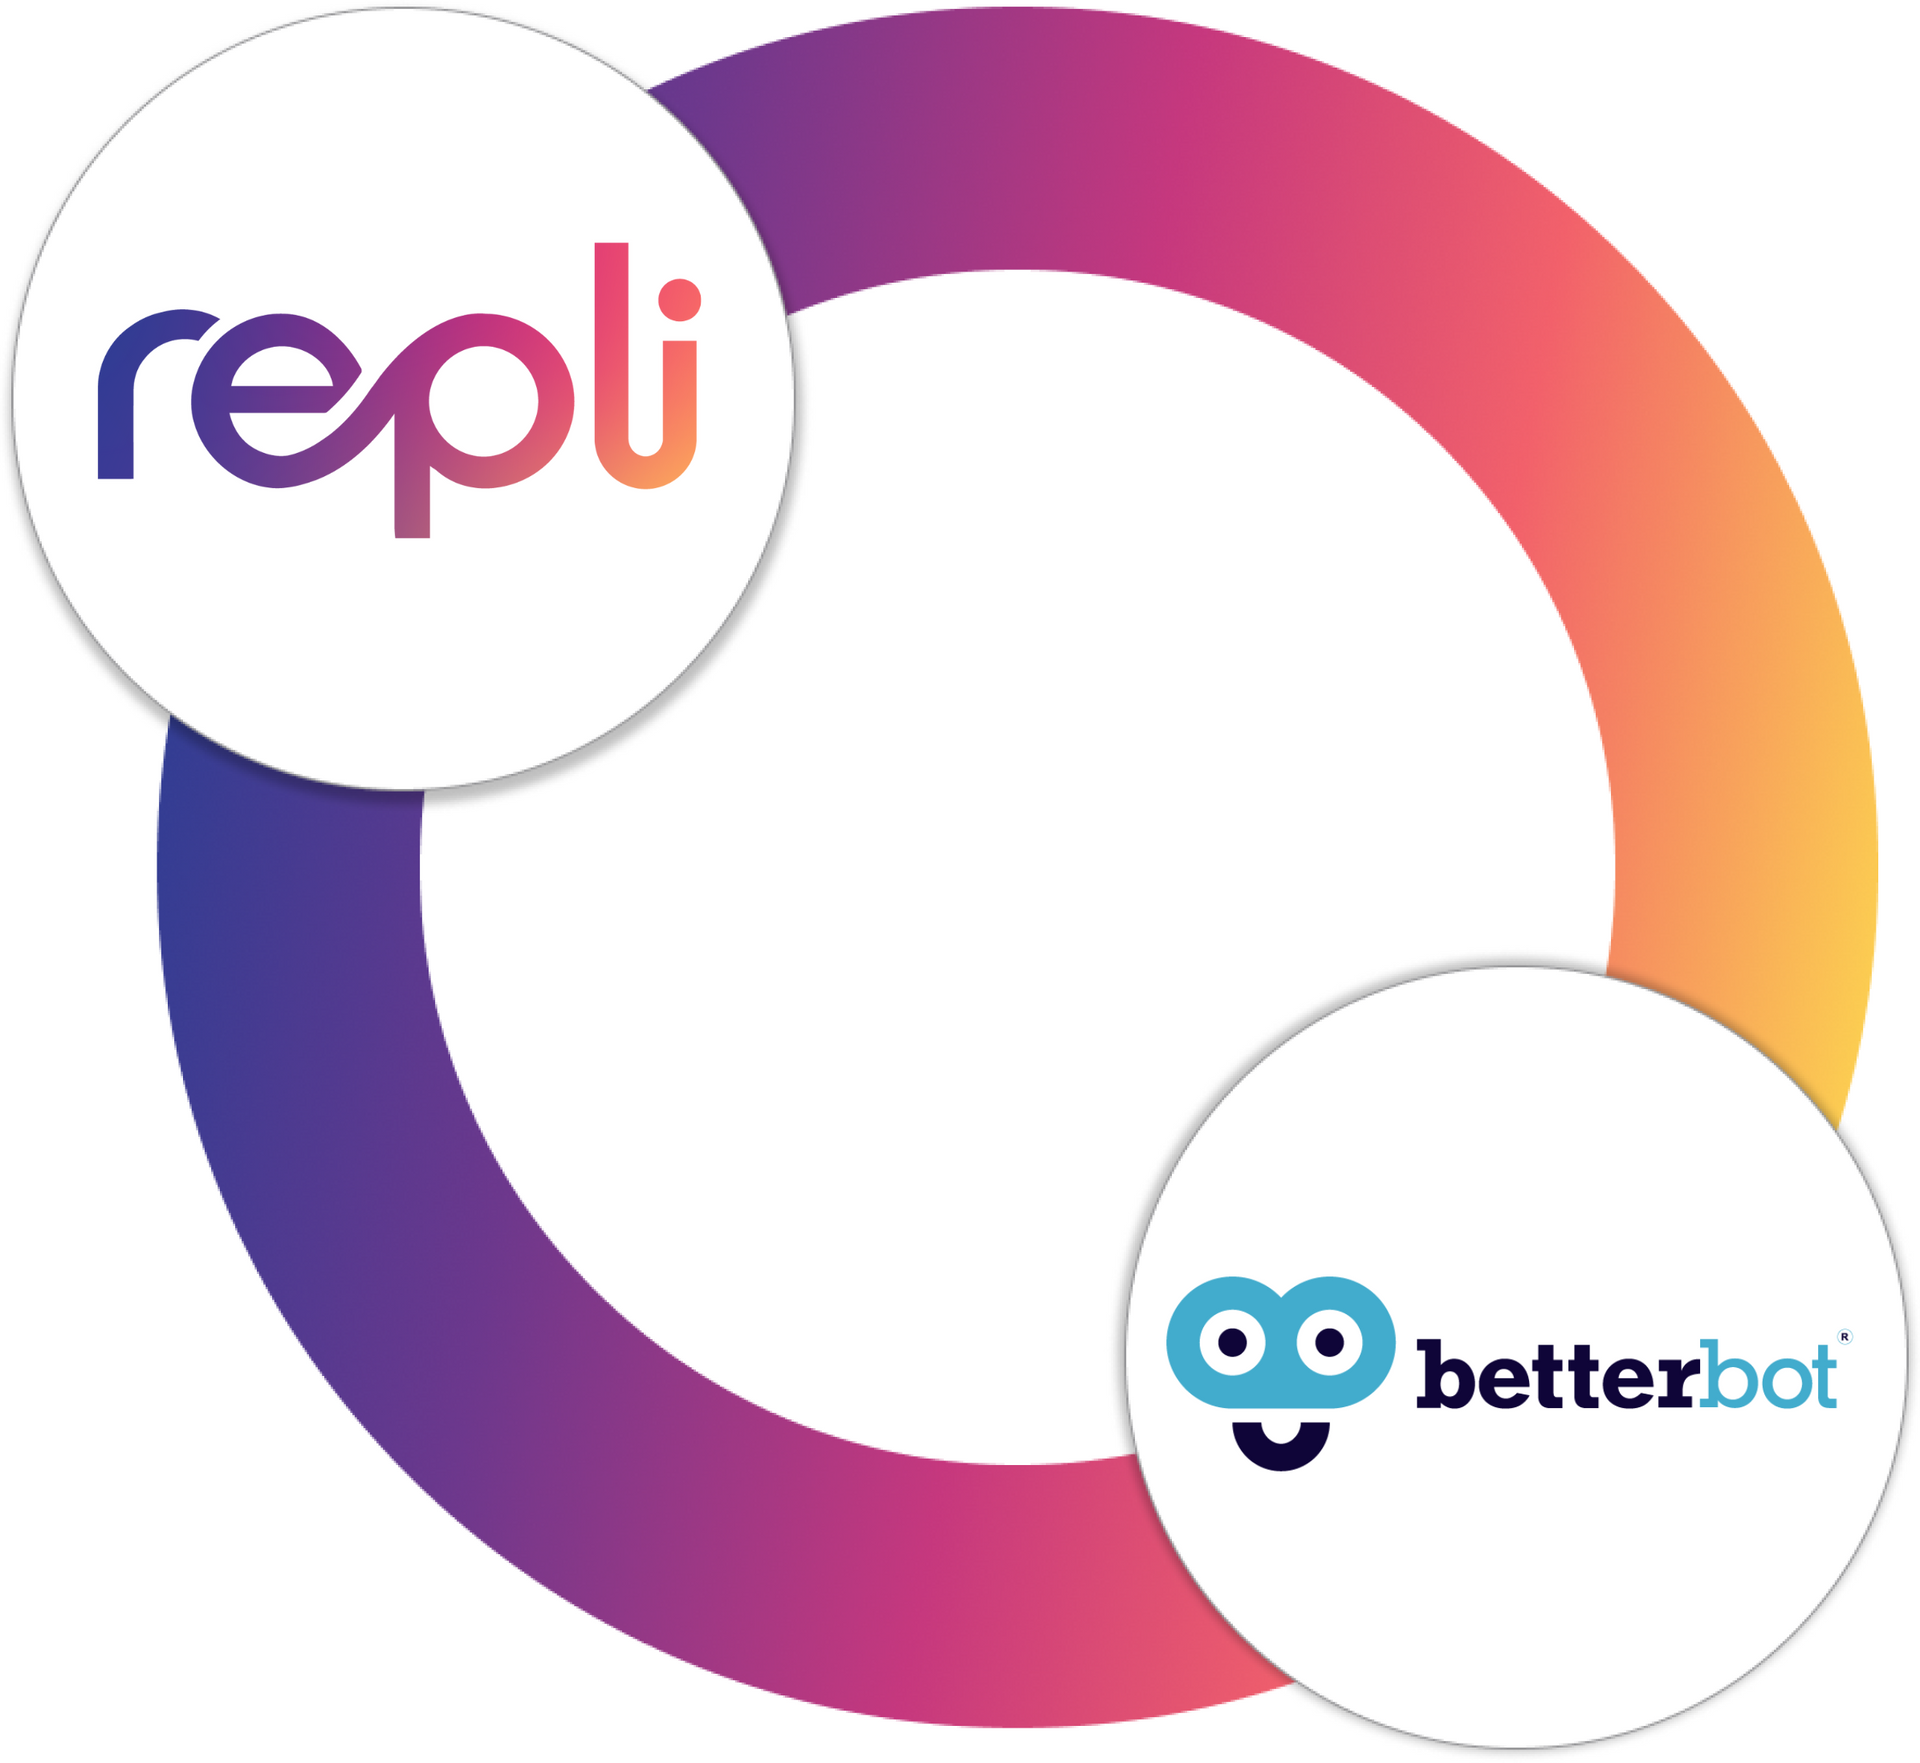 A circle with the words repli and betterbot on it